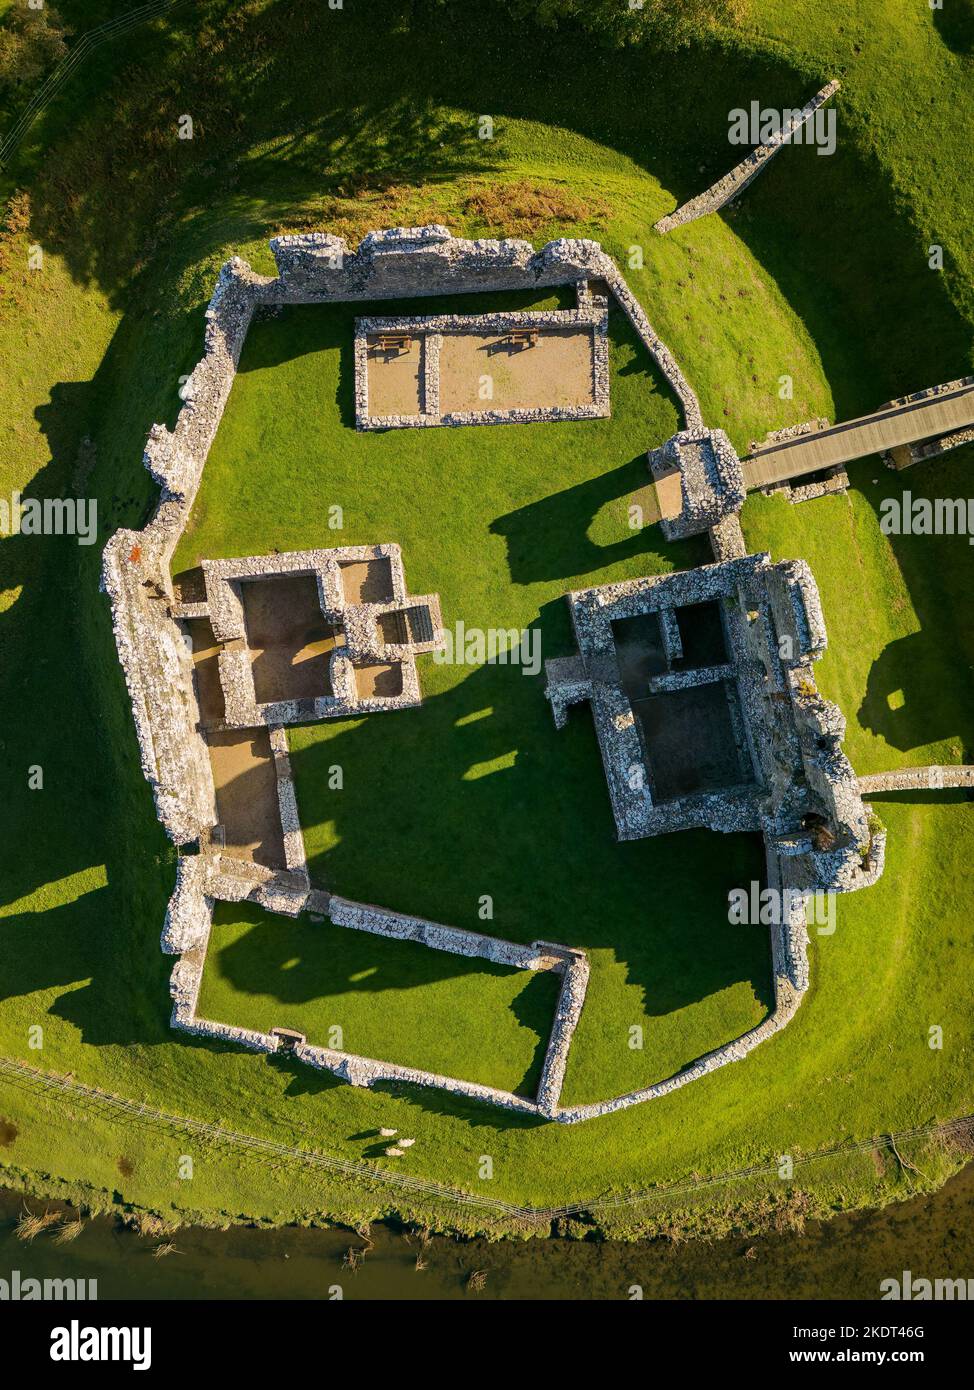 Aerial view of a ruined Norman conquest era castle in Wales (Ogmore Castle, Glamorgan) Stock Photo